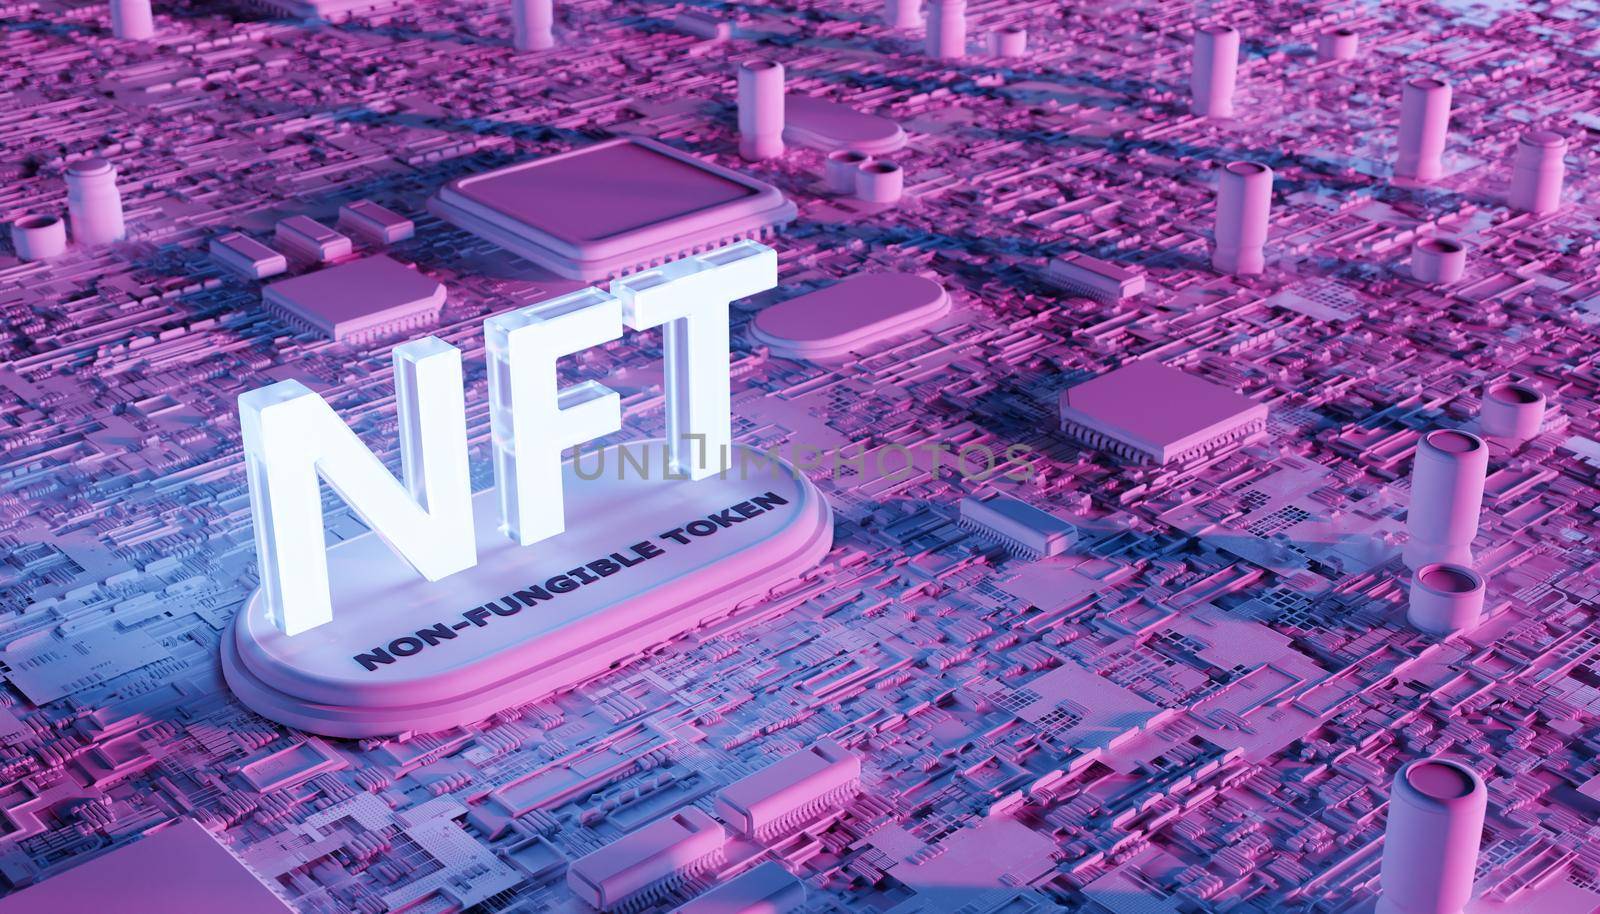 NFT word on a motherboard full of components and neon lighting. metaverse concept, nft, play to earn, crypto, blockchain and technology. 3d rendering